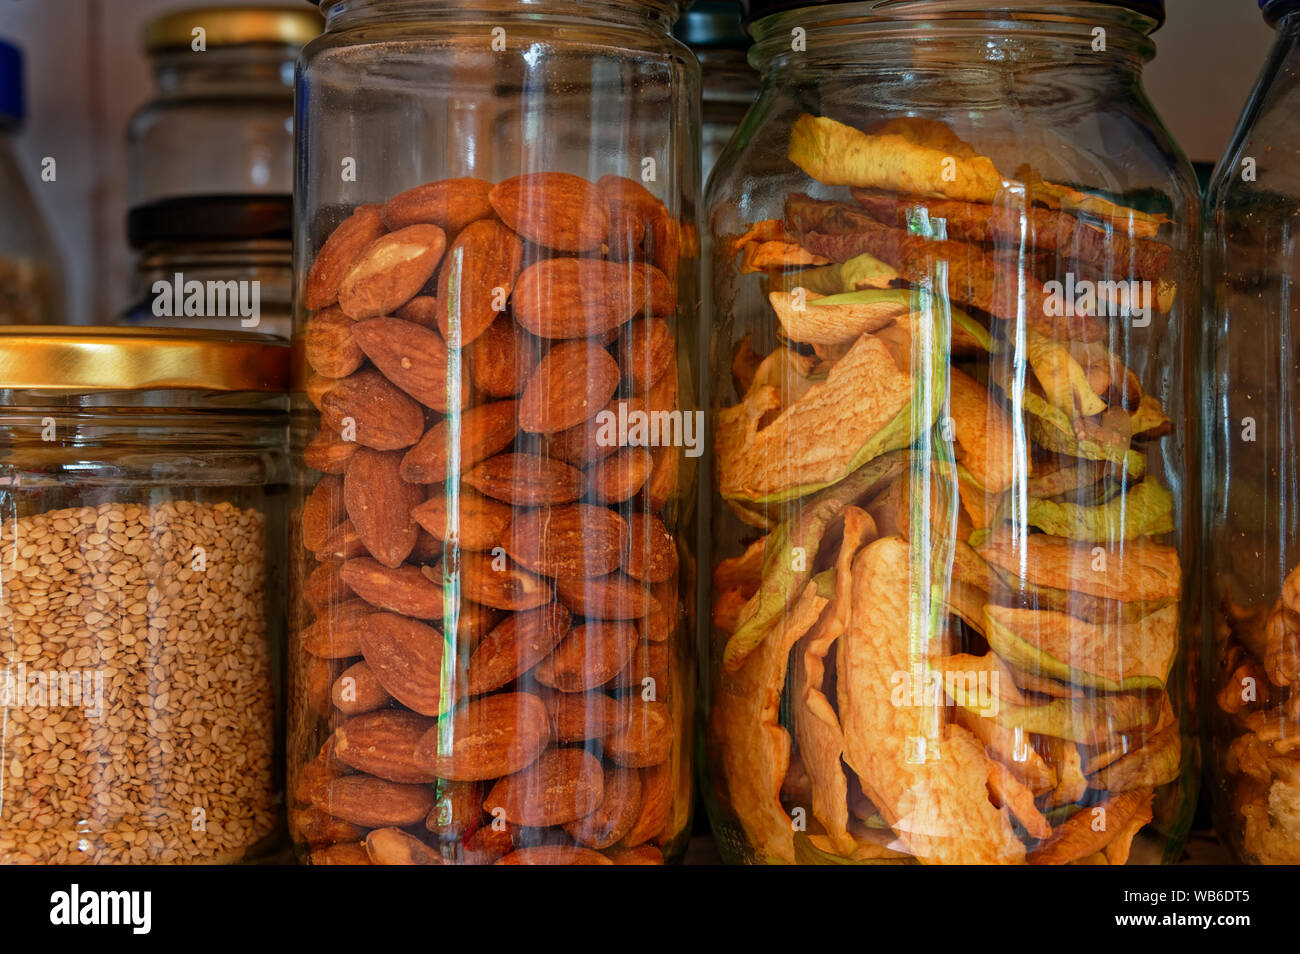 Almonds and dried apple slices stored in glass jars, reducing the use of plastic Stock Photo